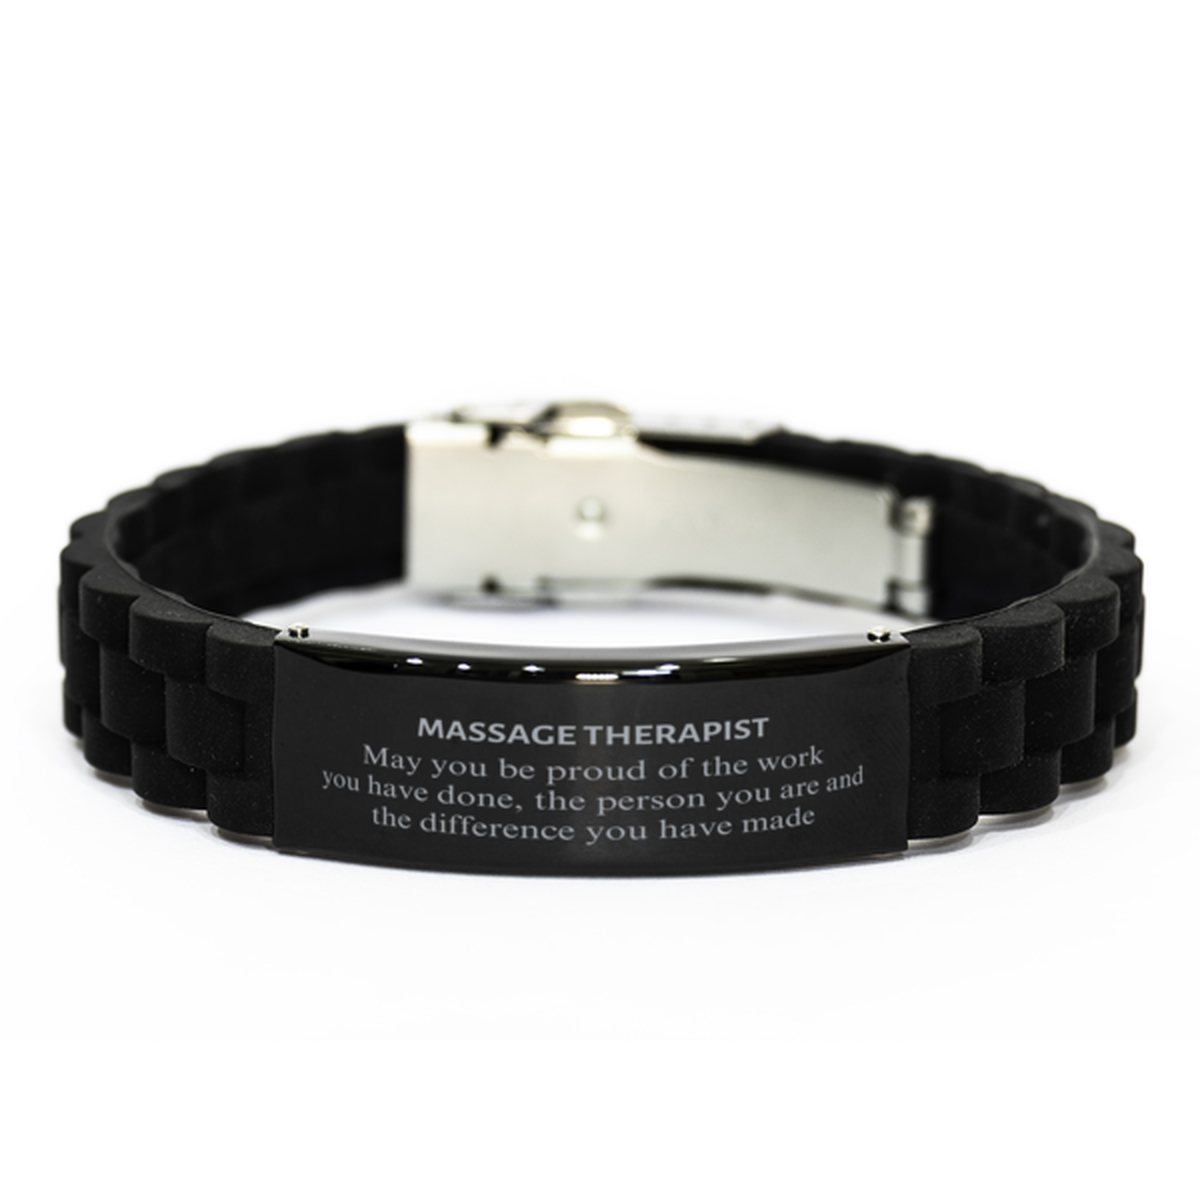 Massage Therapist May you be proud of the work you have done, Retirement Massage Therapist Black Glidelock Clasp Bracelet for Colleague Appreciation Gifts Amazing for Massage Therapist